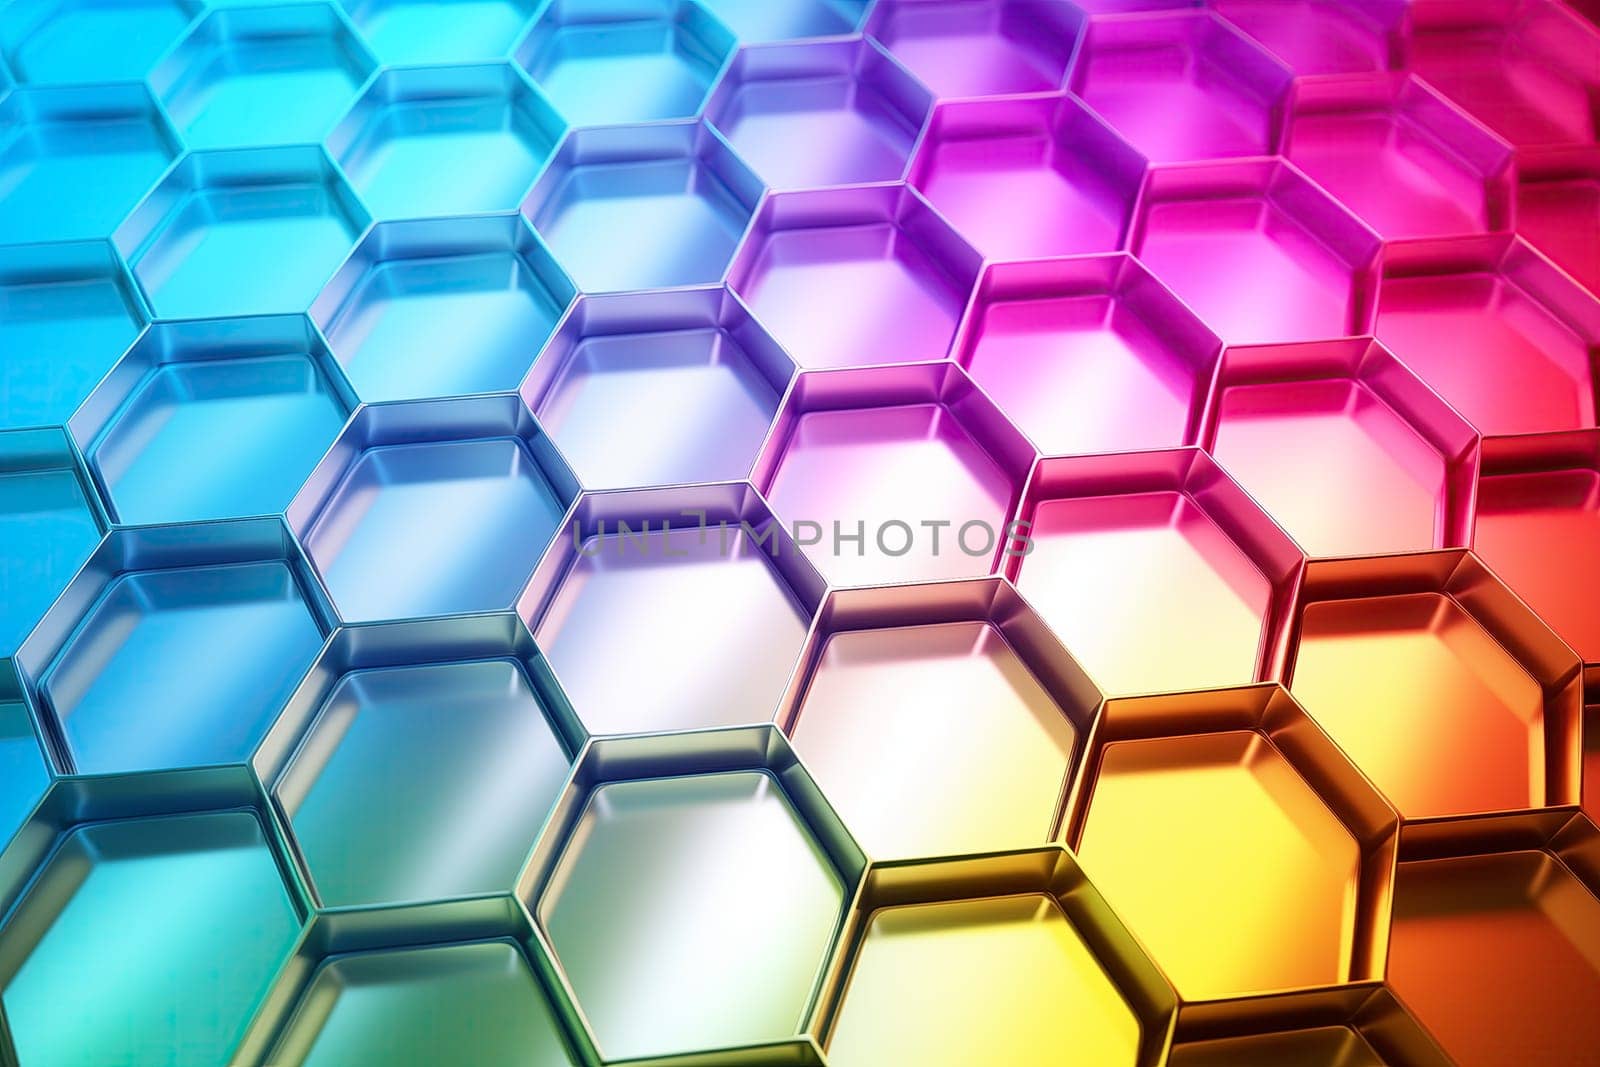 Vibrant Honeycomb Gradient Pattern Background by dimol